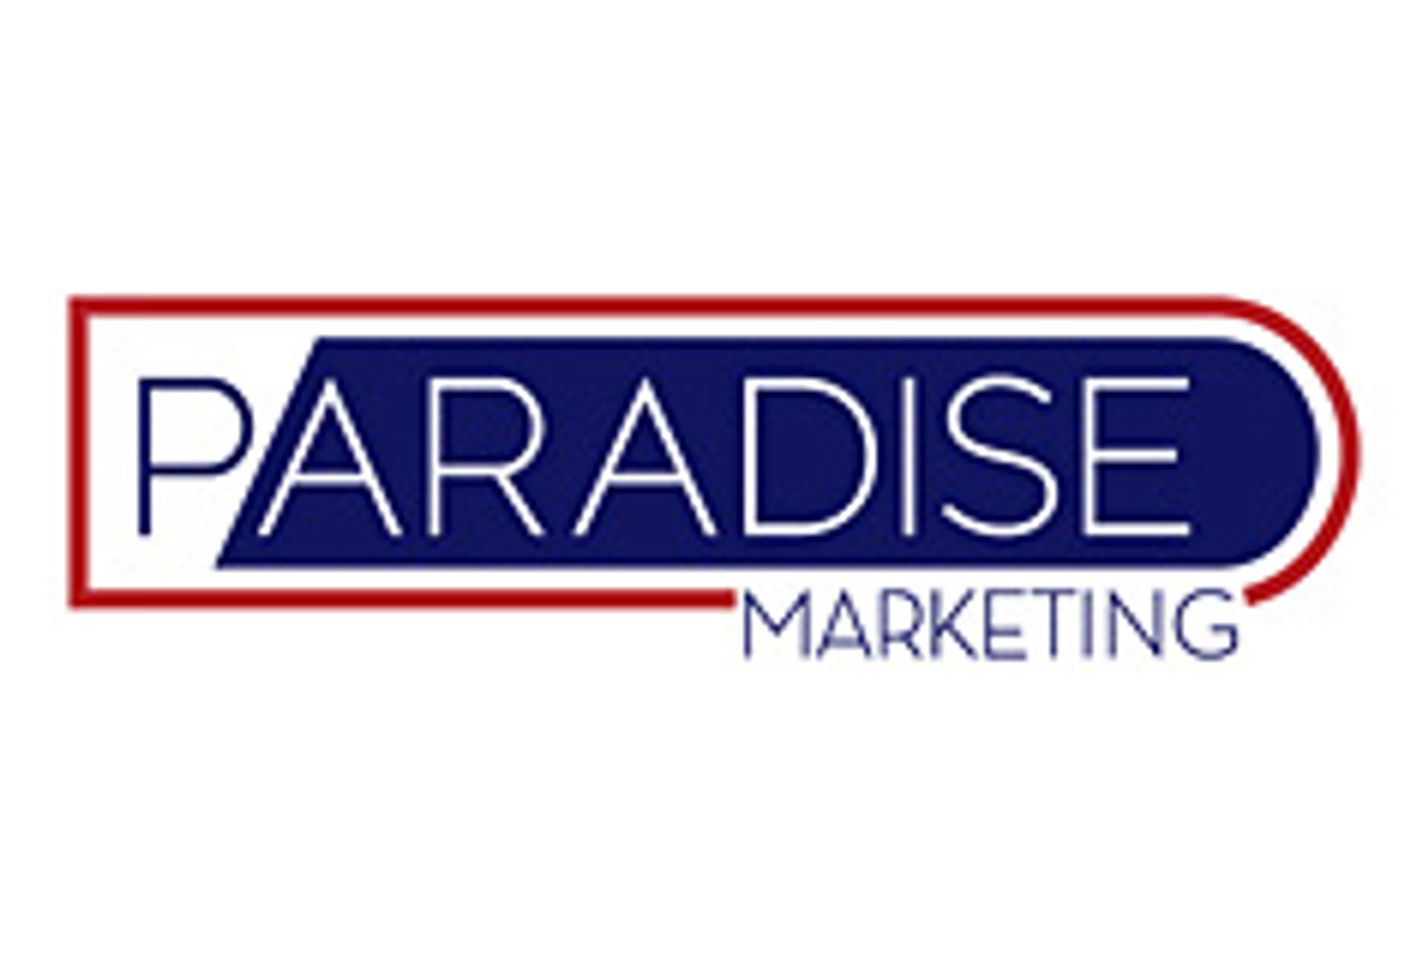 Paradise Marketing, 10 Top Brands Nominated for AVN Awards